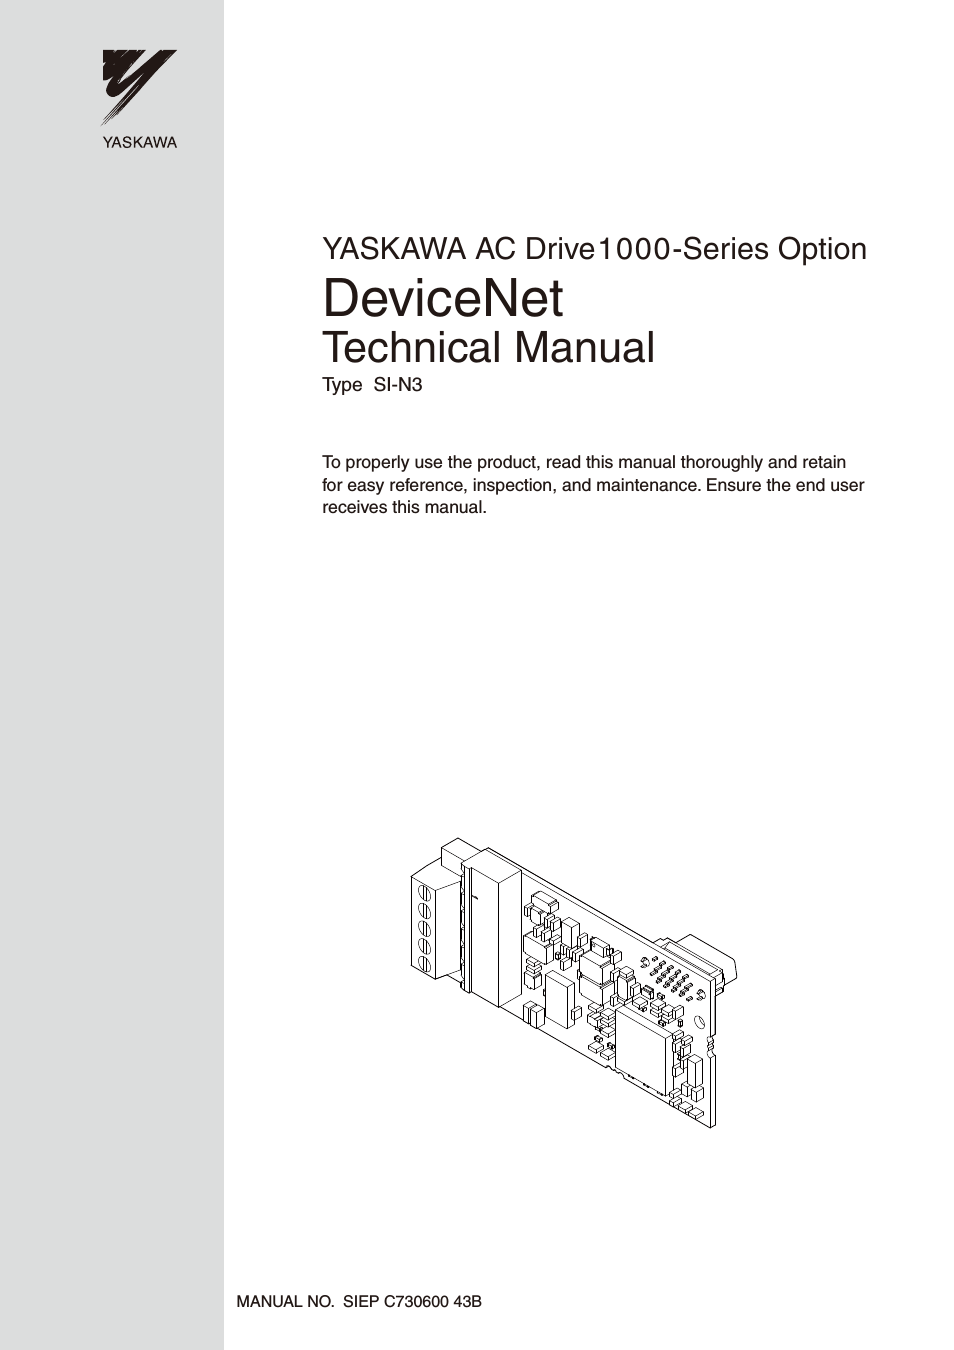 1000 Series Drive Option - DeviceNet Technical Manual